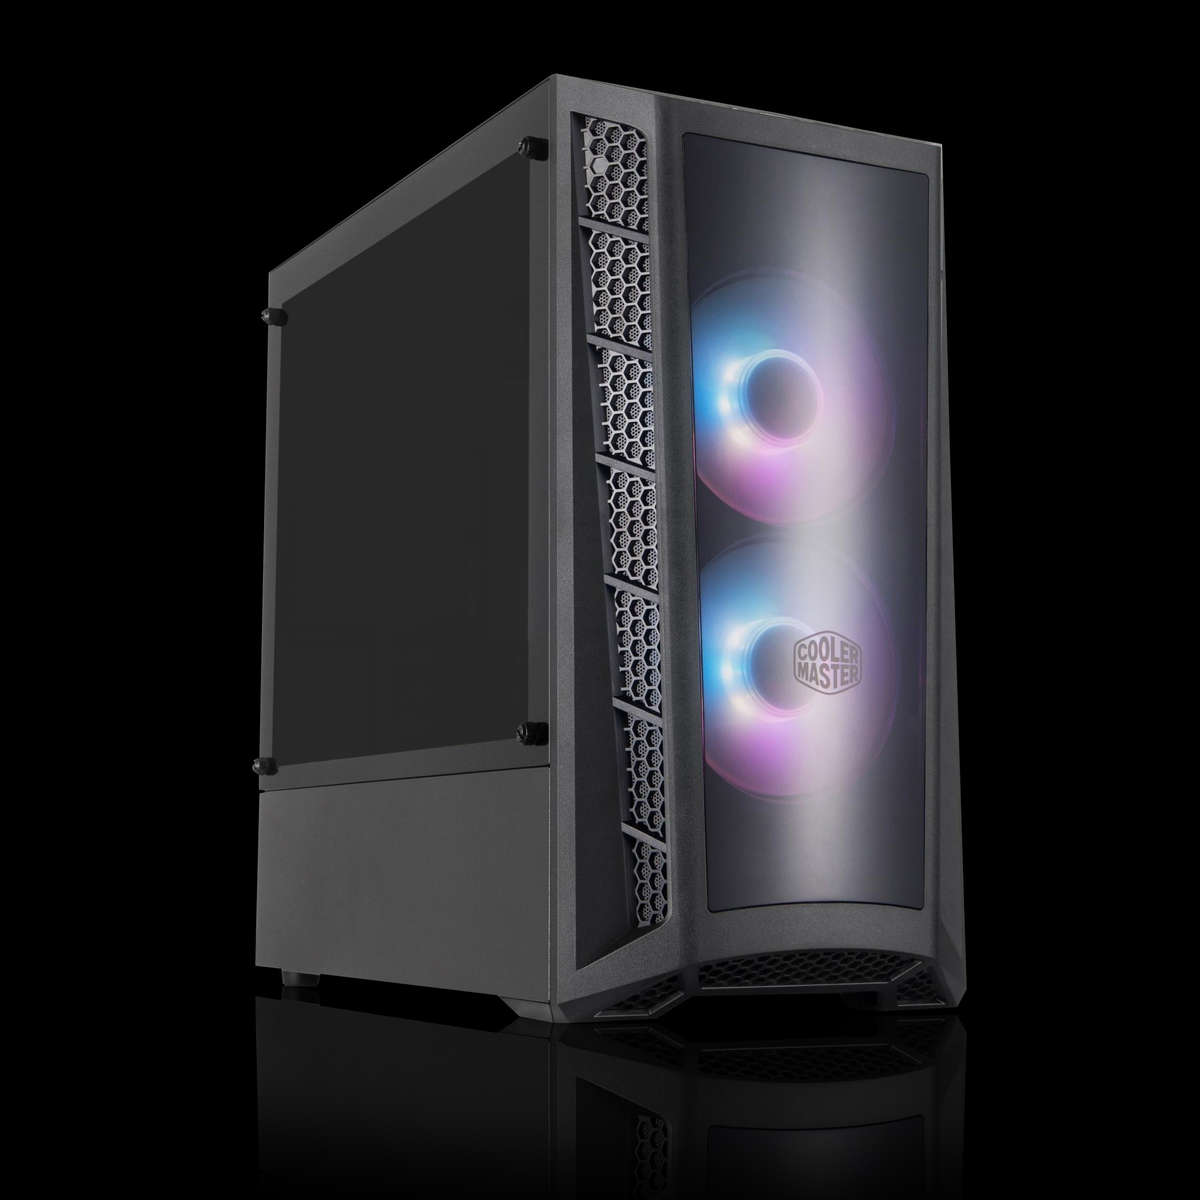 Image of the Chillblast Fusion Fiend gaming PC